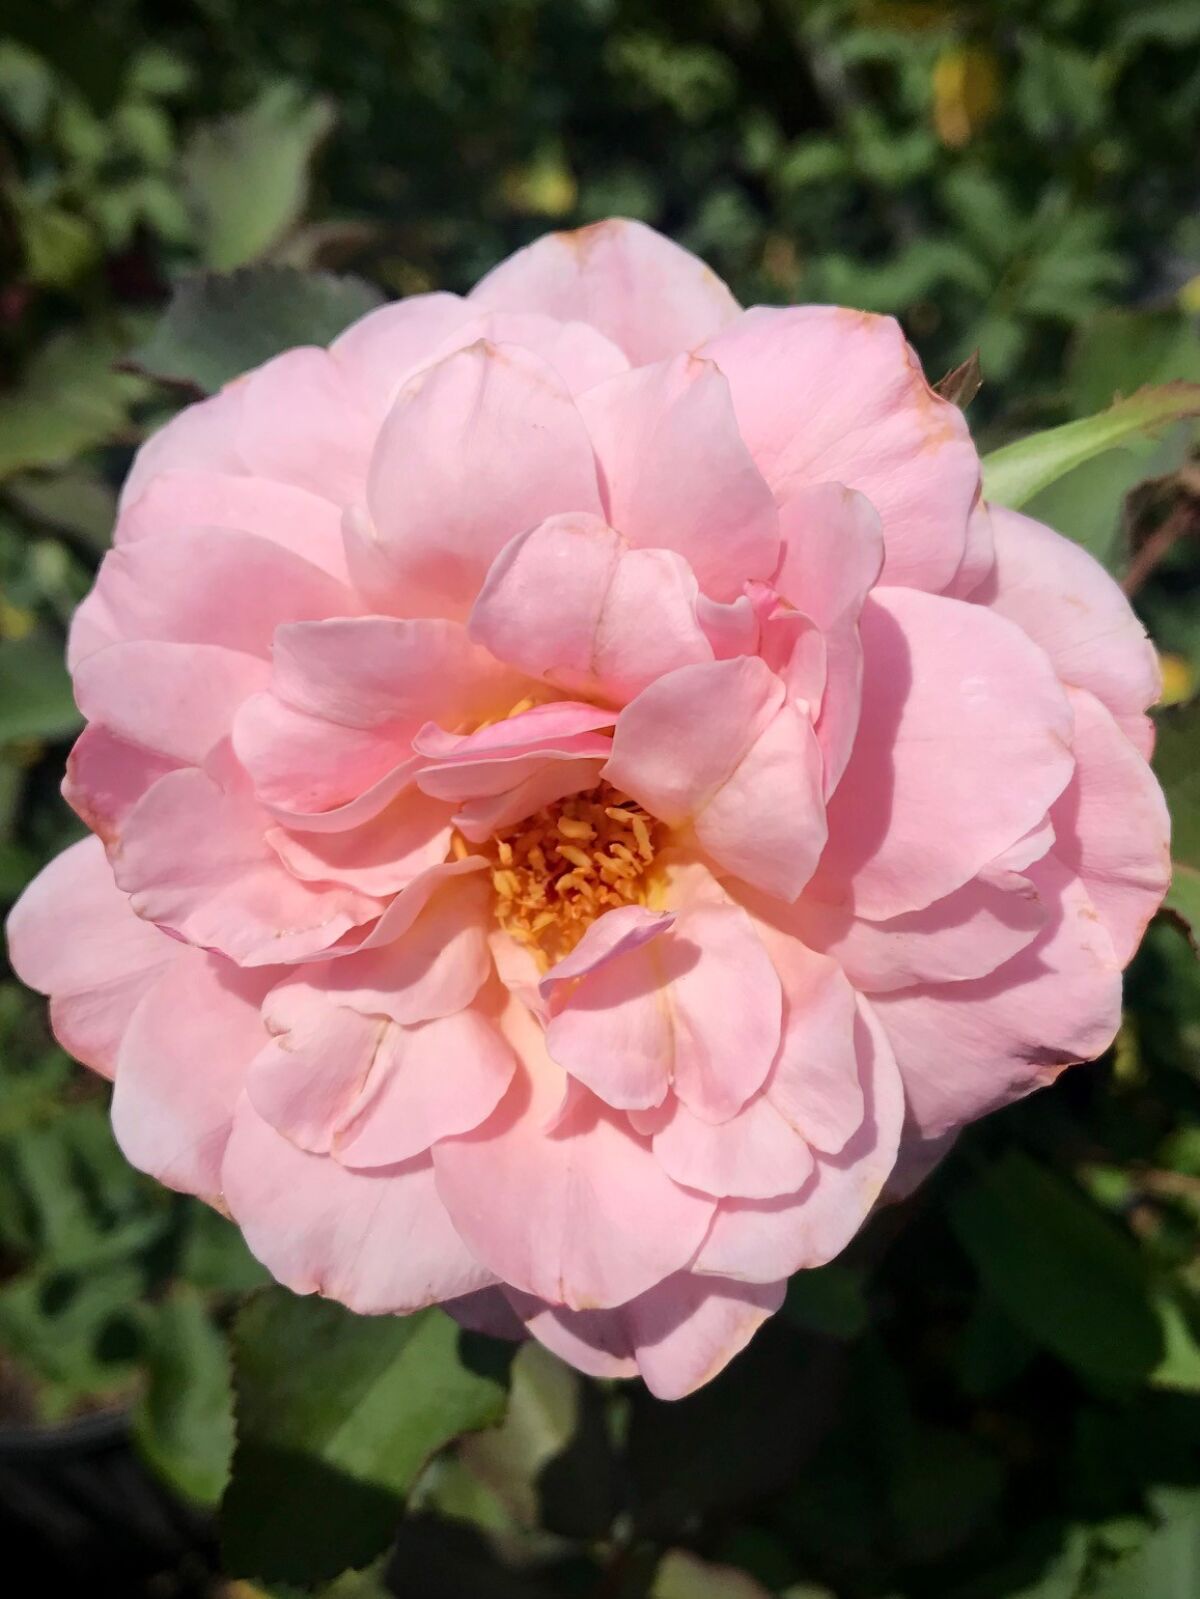 The large, light pink bloom of ‘Magnolia Memories,’ a rose introduced by Antique Rose Emporium.